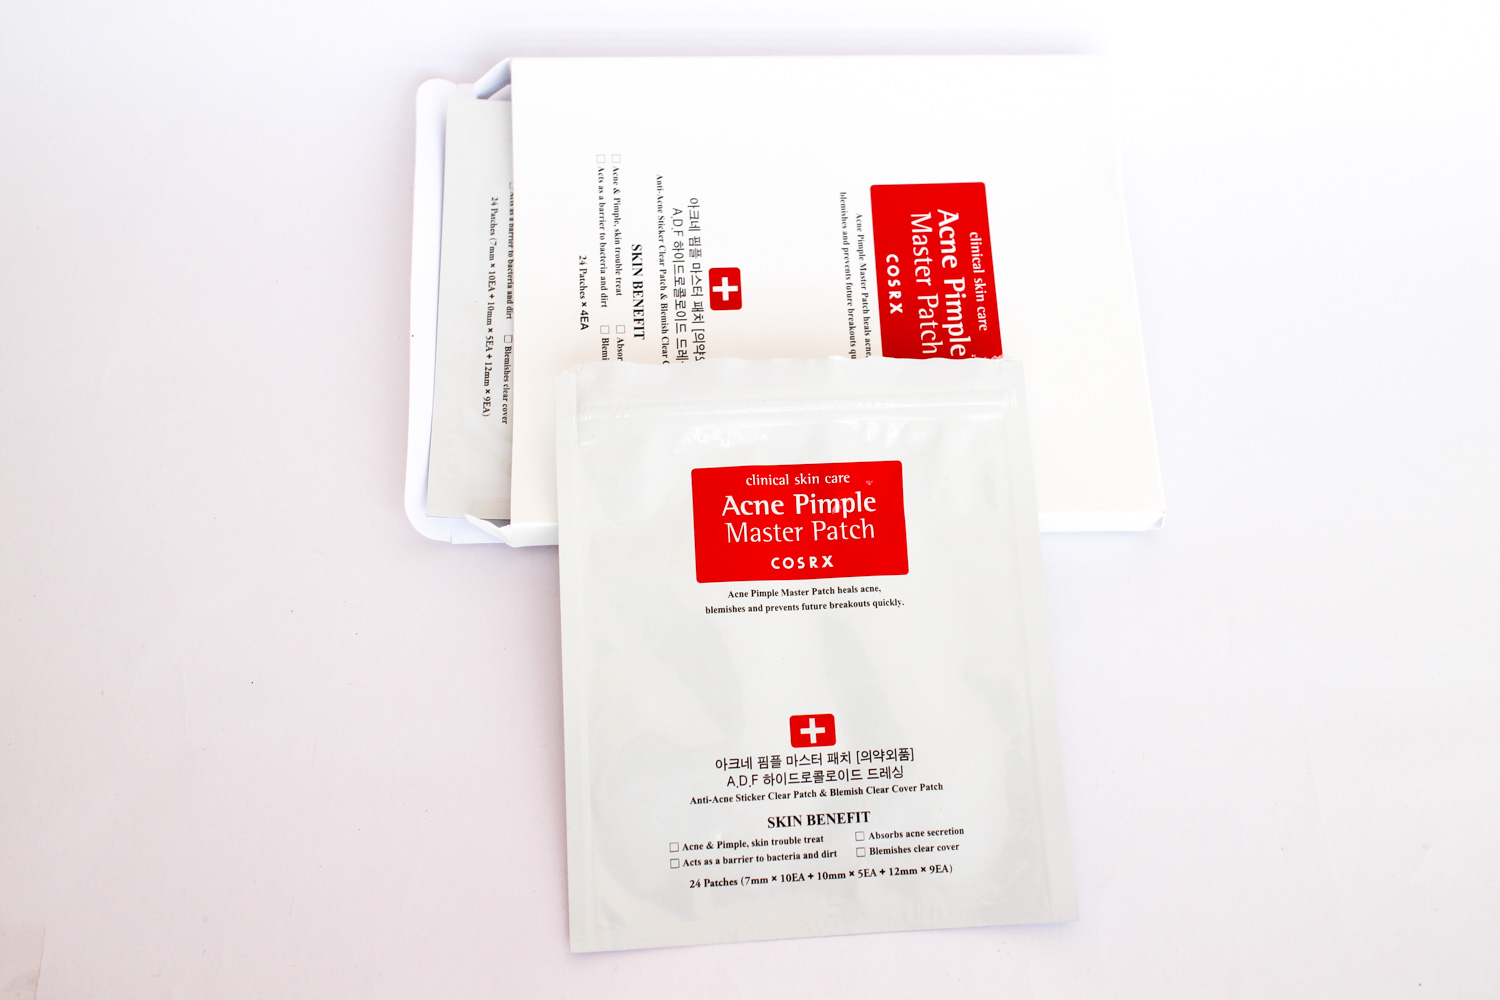 cosrx acne pimple master patch review